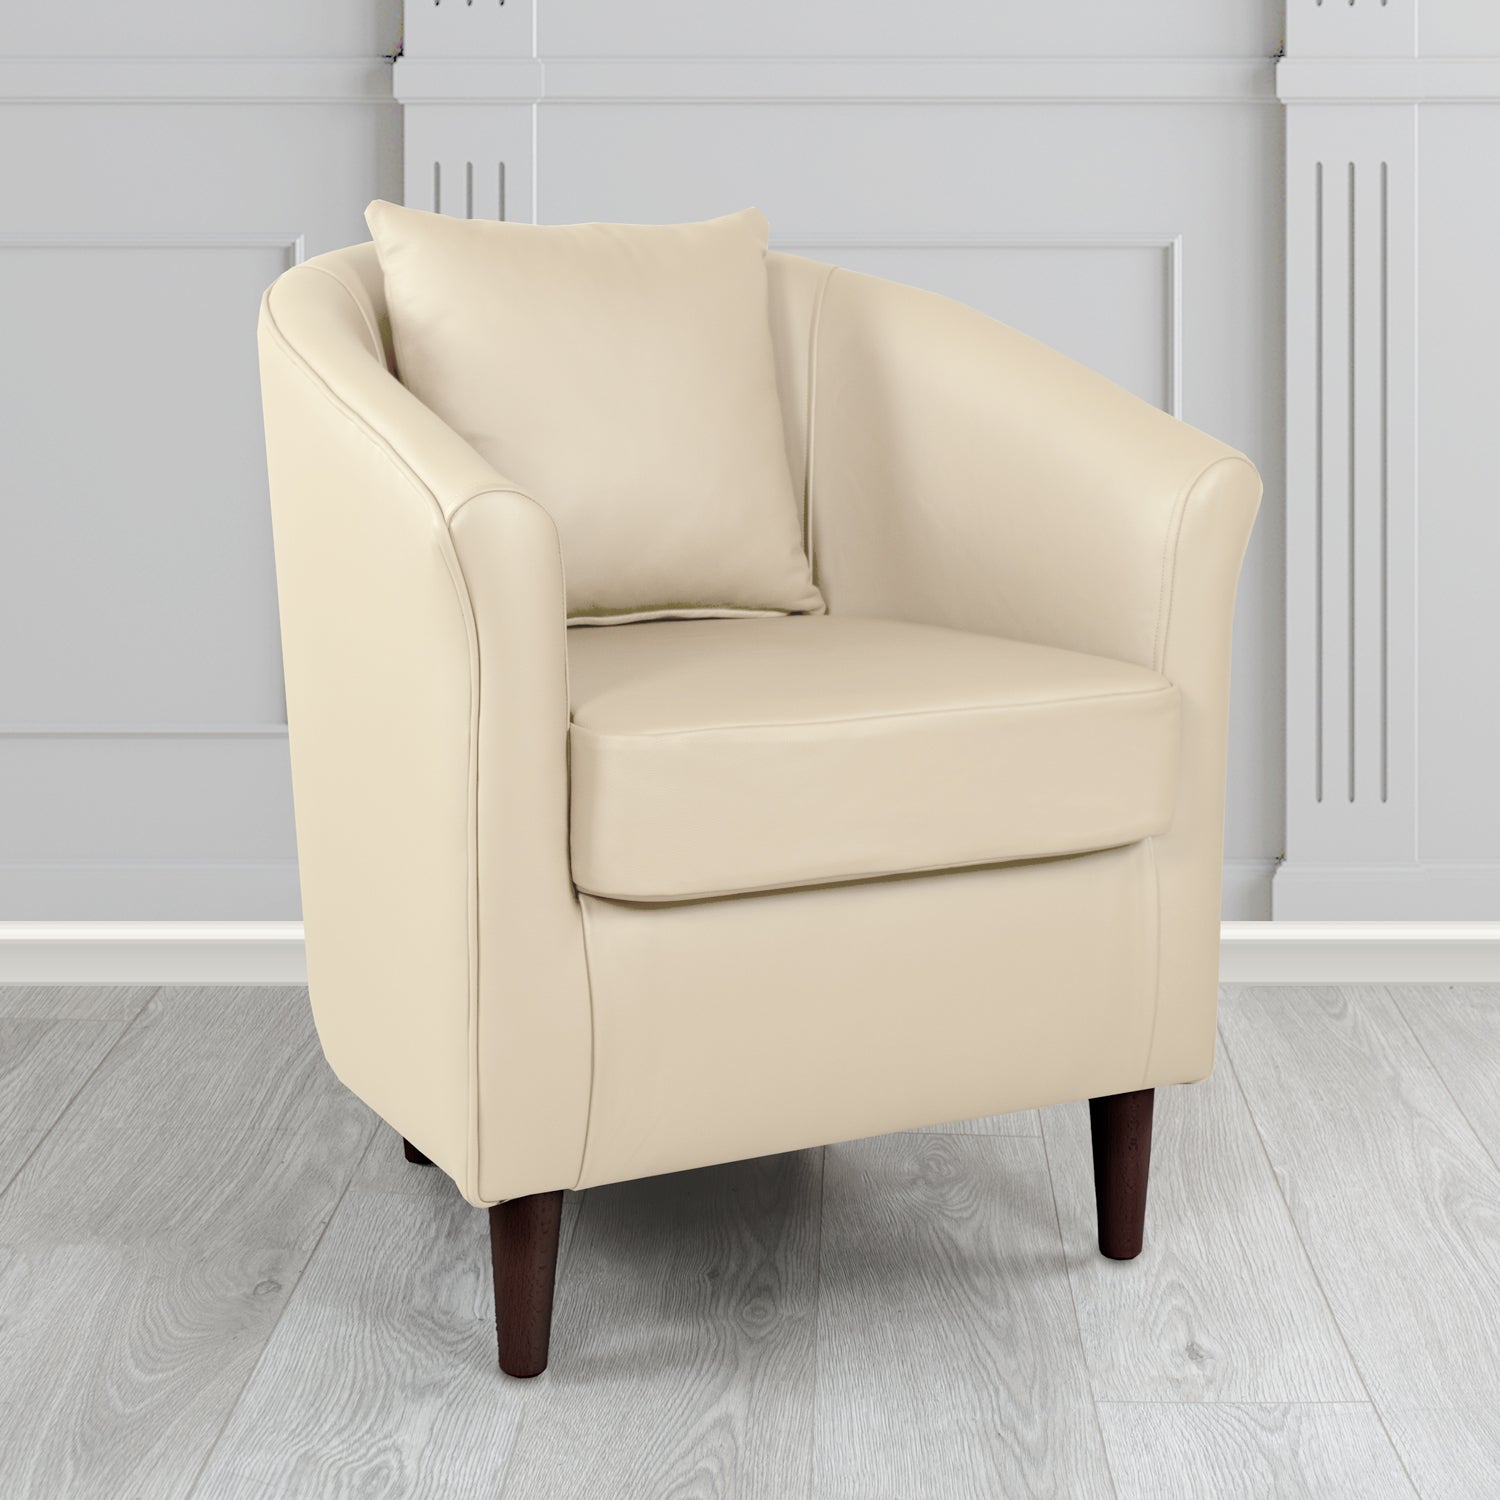 St Tropez Tub Chair in Crib 5 Contempo Ivory Genuine Leather